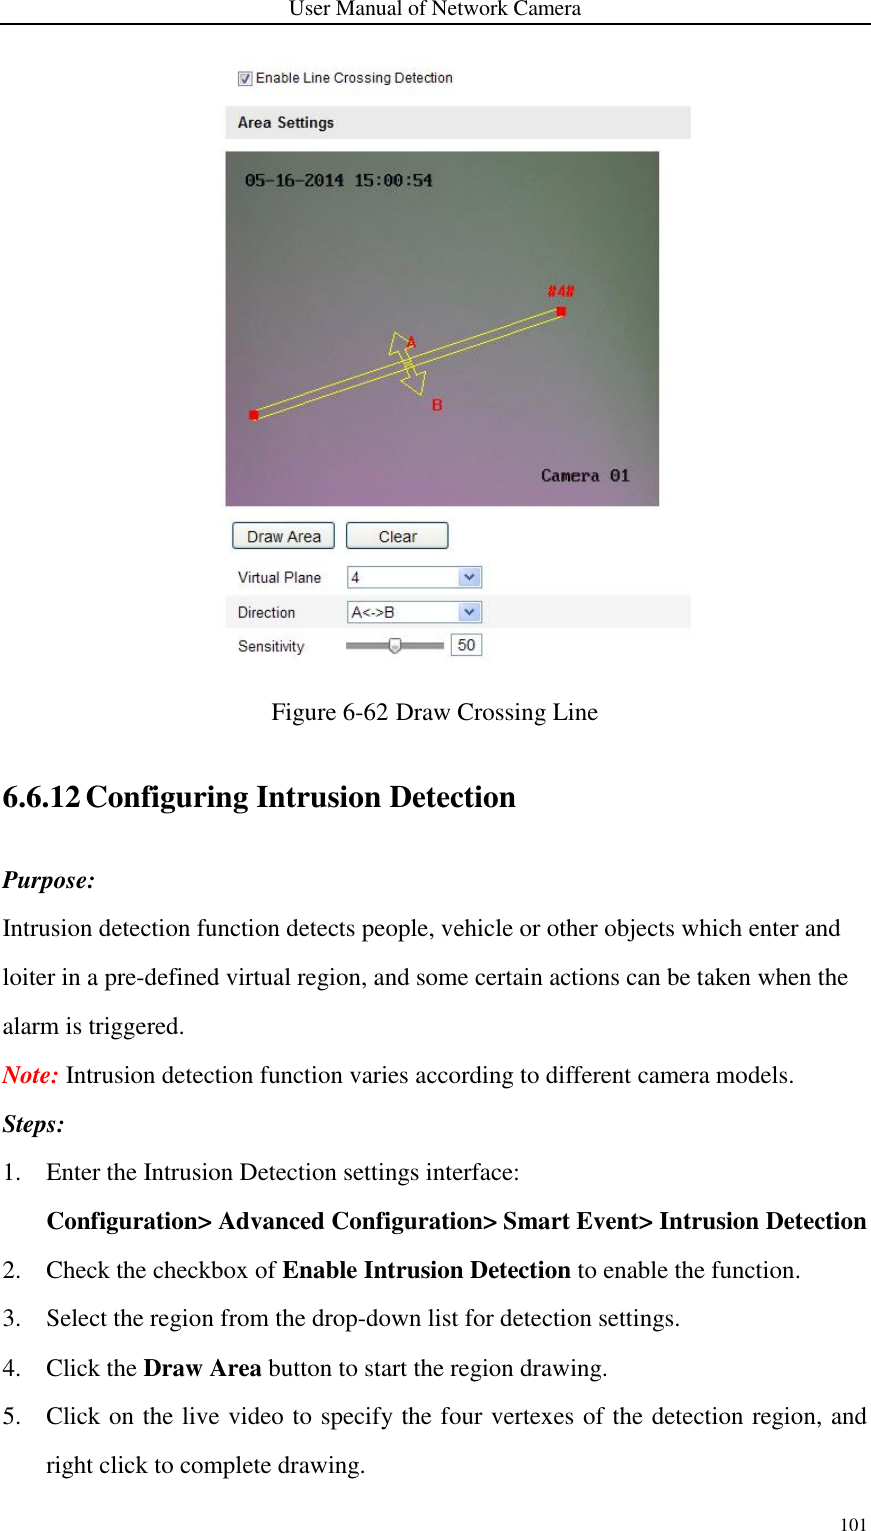 User Manual of Network Camera 101   Figure 6-62 Draw Crossing Line 6.6.12 Configuring Intrusion Detection Purpose: Intrusion detection function detects people, vehicle or other objects which enter and loiter in a pre-defined virtual region, and some certain actions can be taken when the alarm is triggered. Note: Intrusion detection function varies according to different camera models. Steps: 1. Enter the Intrusion Detection settings interface:   Configuration&gt; Advanced Configuration&gt; Smart Event&gt; Intrusion Detection 2. Check the checkbox of Enable Intrusion Detection to enable the function. 3. Select the region from the drop-down list for detection settings. 4. Click the Draw Area button to start the region drawing. 5. Click on the live video to specify the four vertexes of the detection region, and right click to complete drawing. 